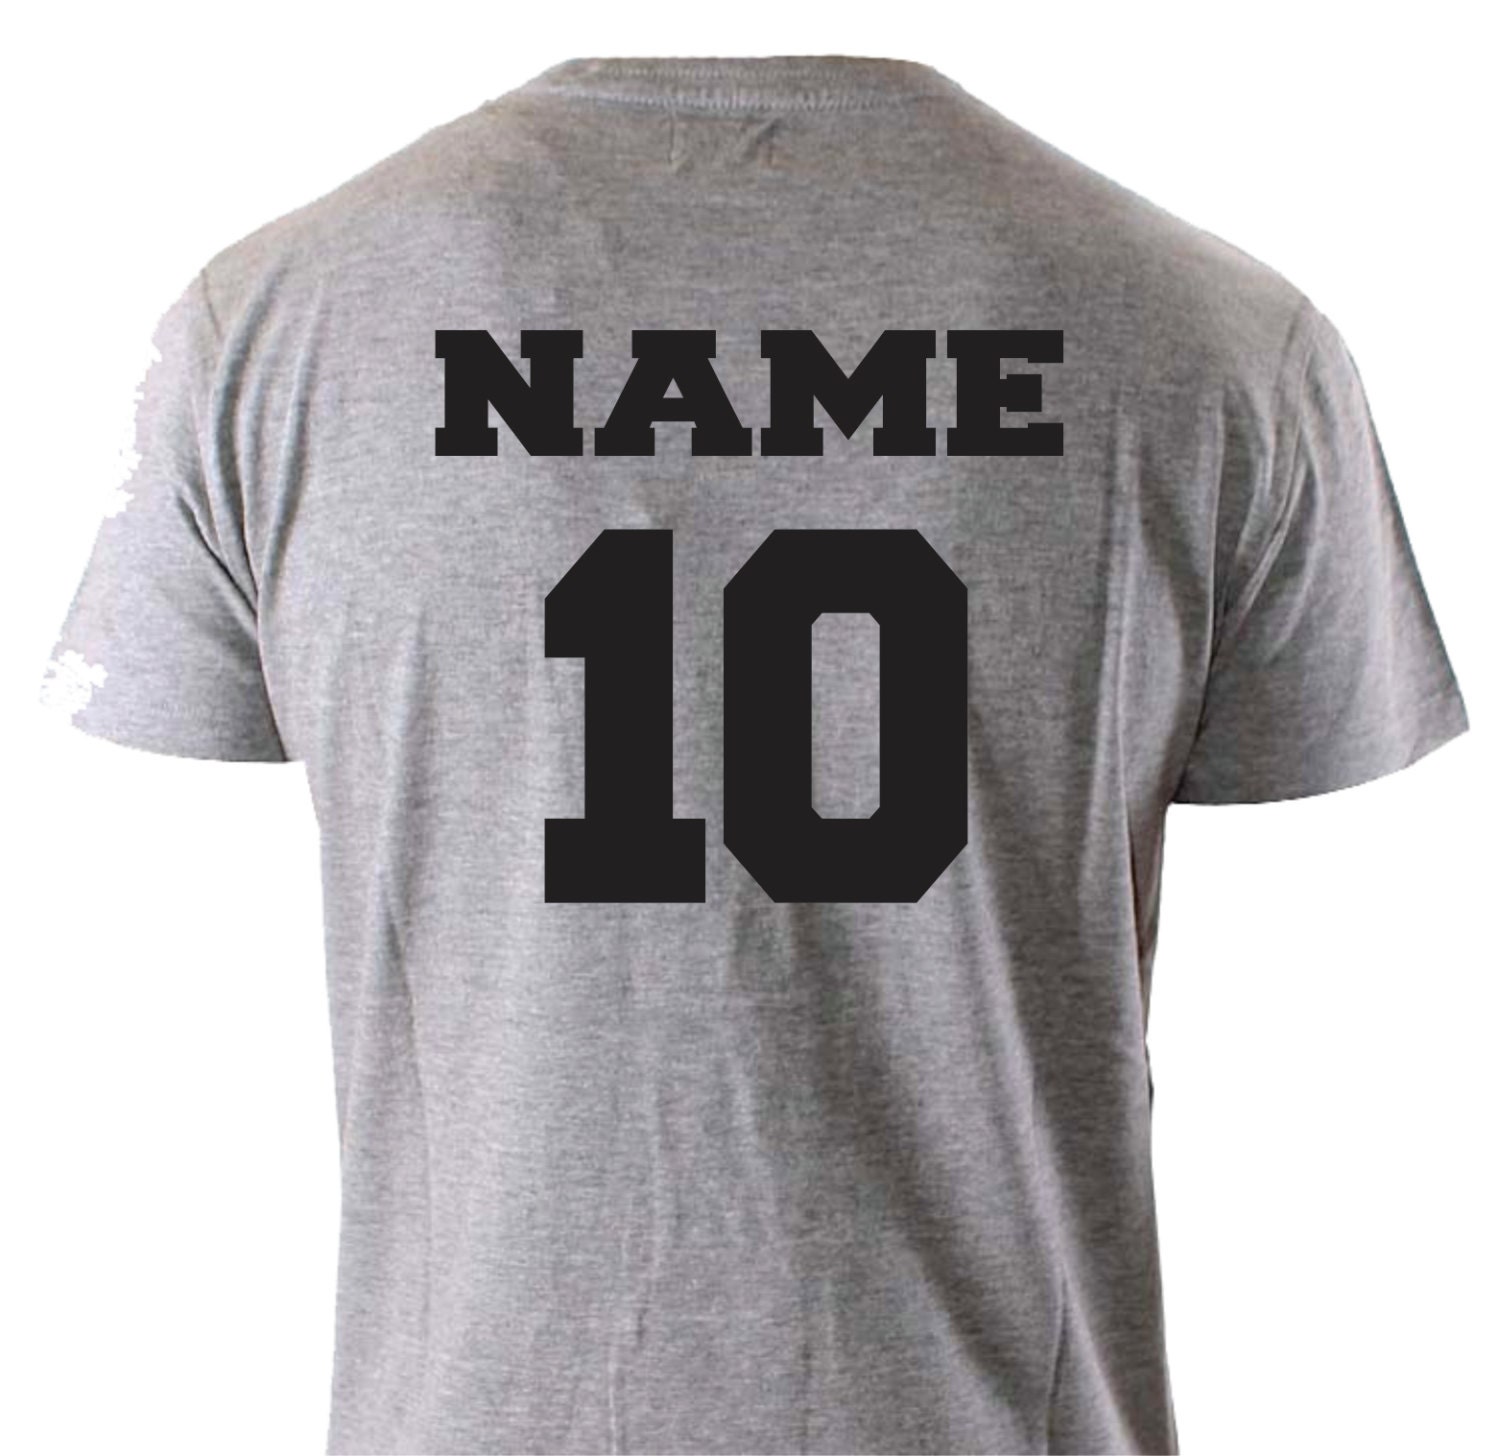 Name & Number add on for back of shirt.